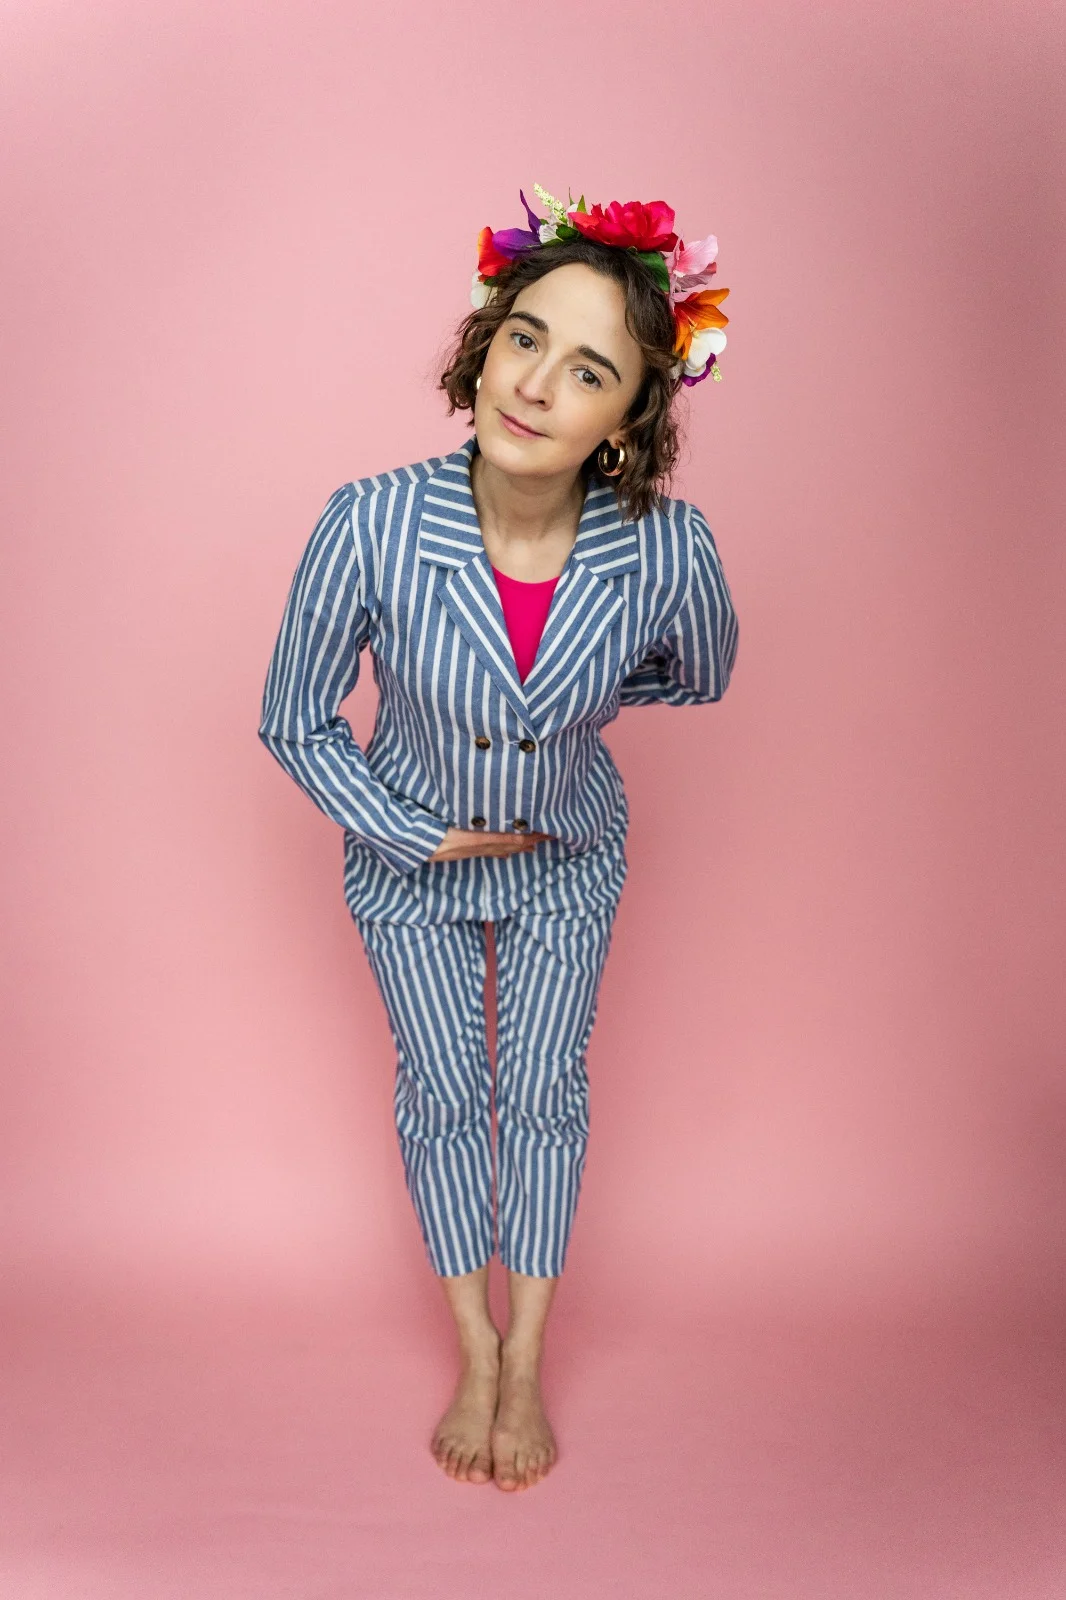 Philippa Dawson in a blue and white pinstripe suit with flowers in her hair on a pink background